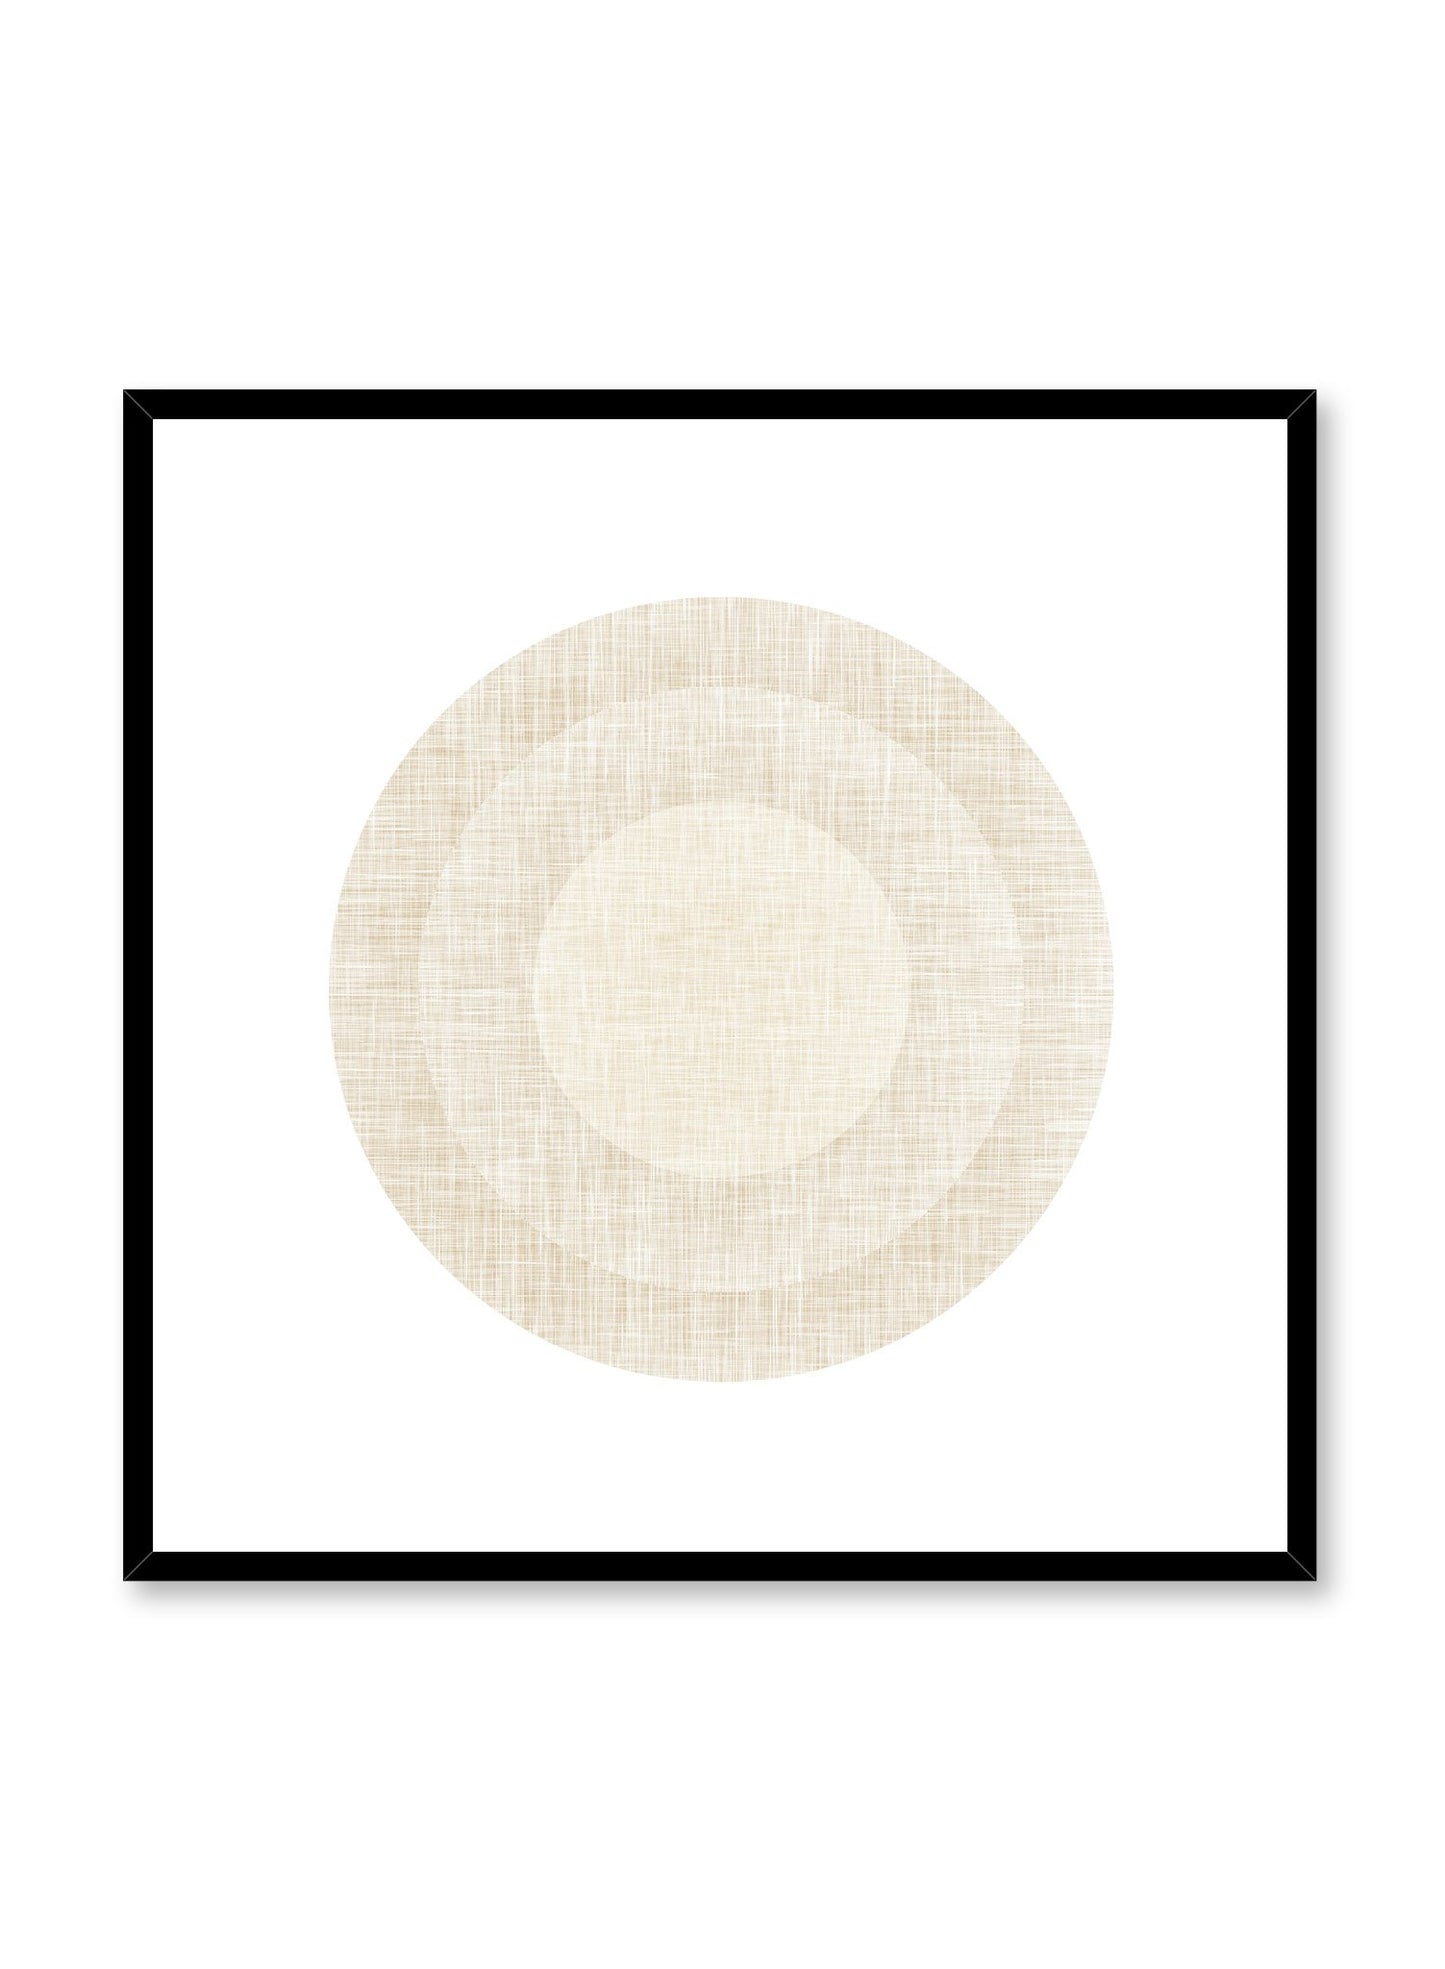 Minimalist design poster by Opposite Wall with abstract beige circles in square format